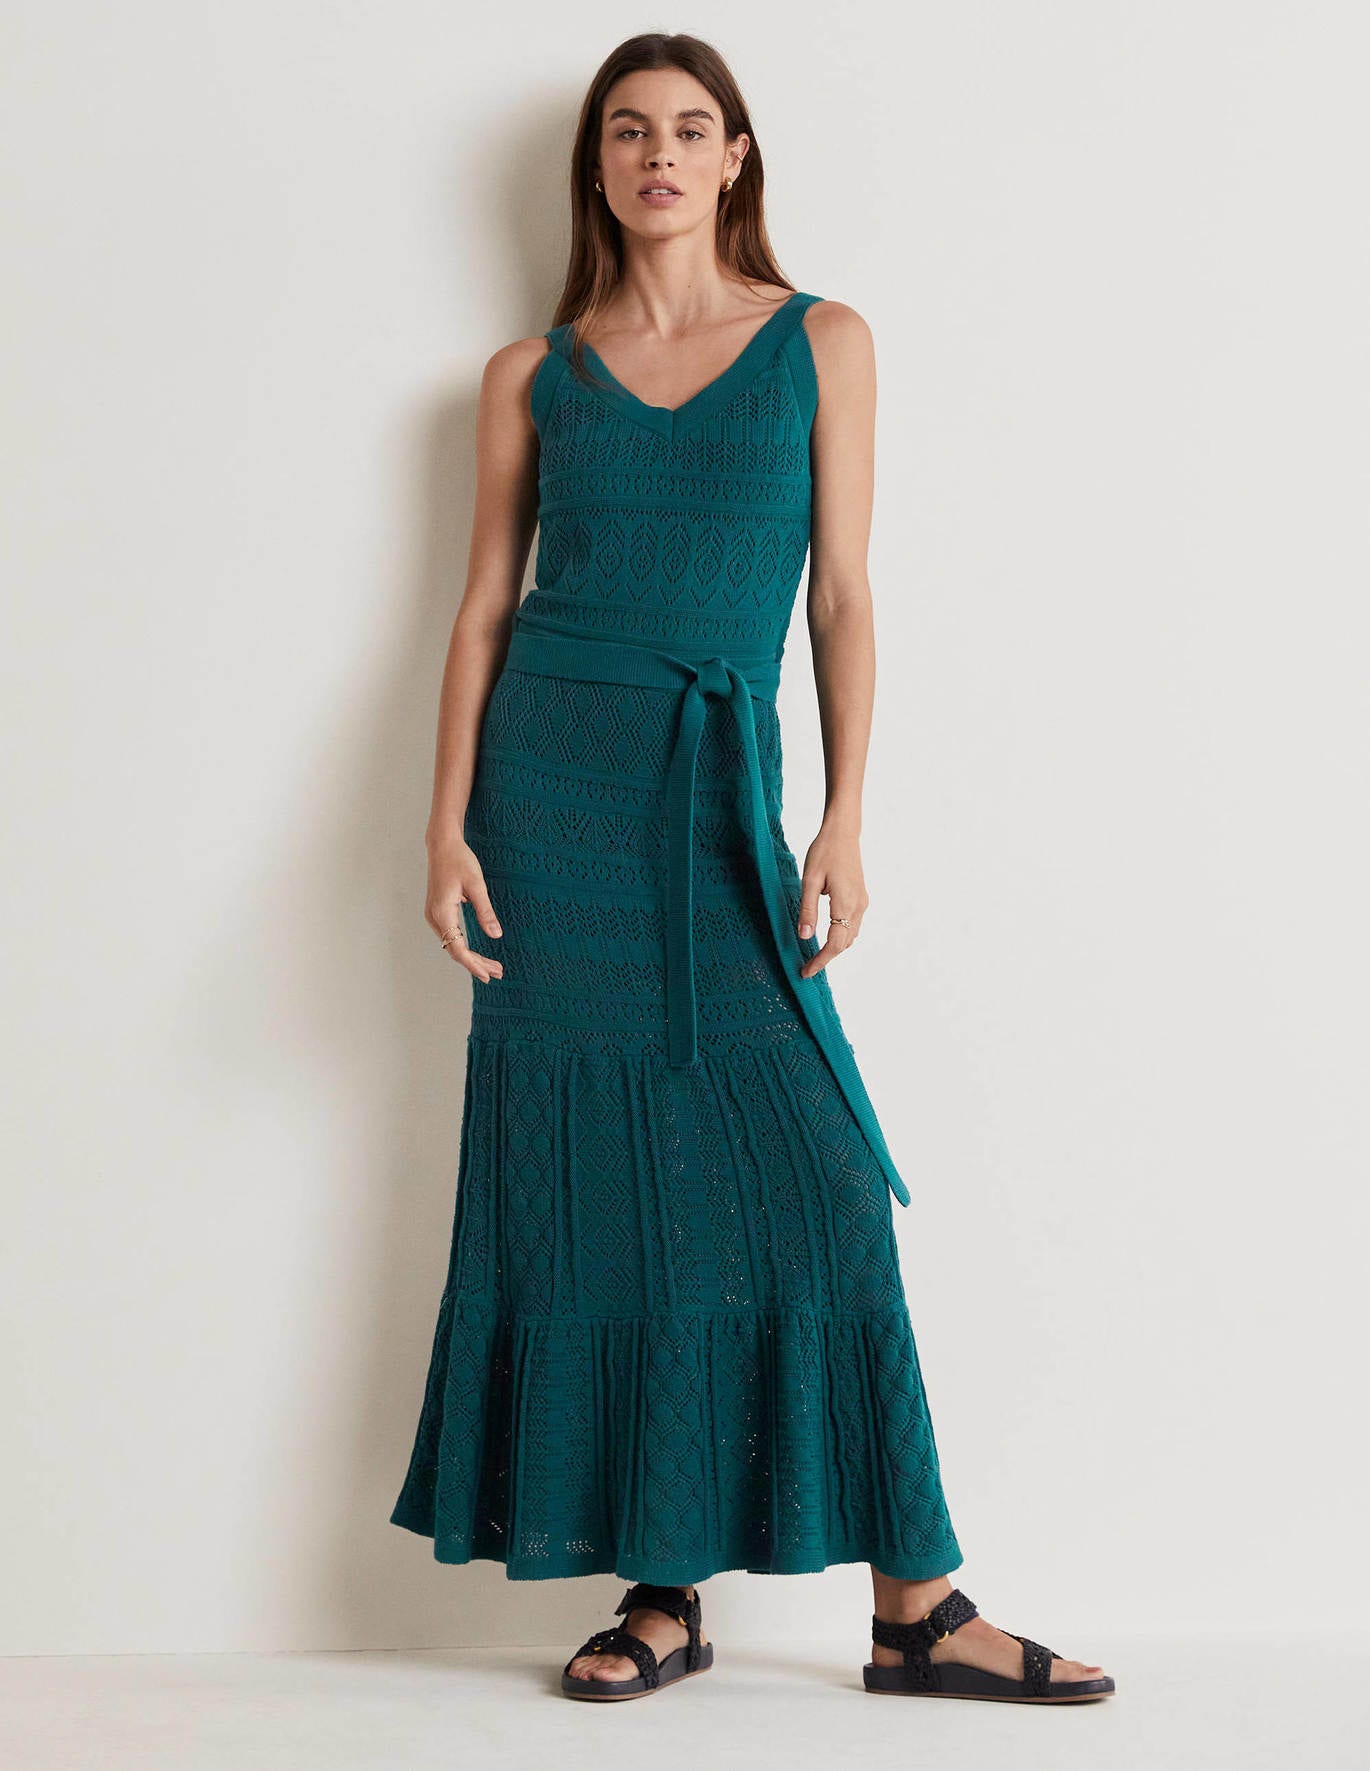 Boden Knitted Lace Maxi Dress - Chesapeake Bay